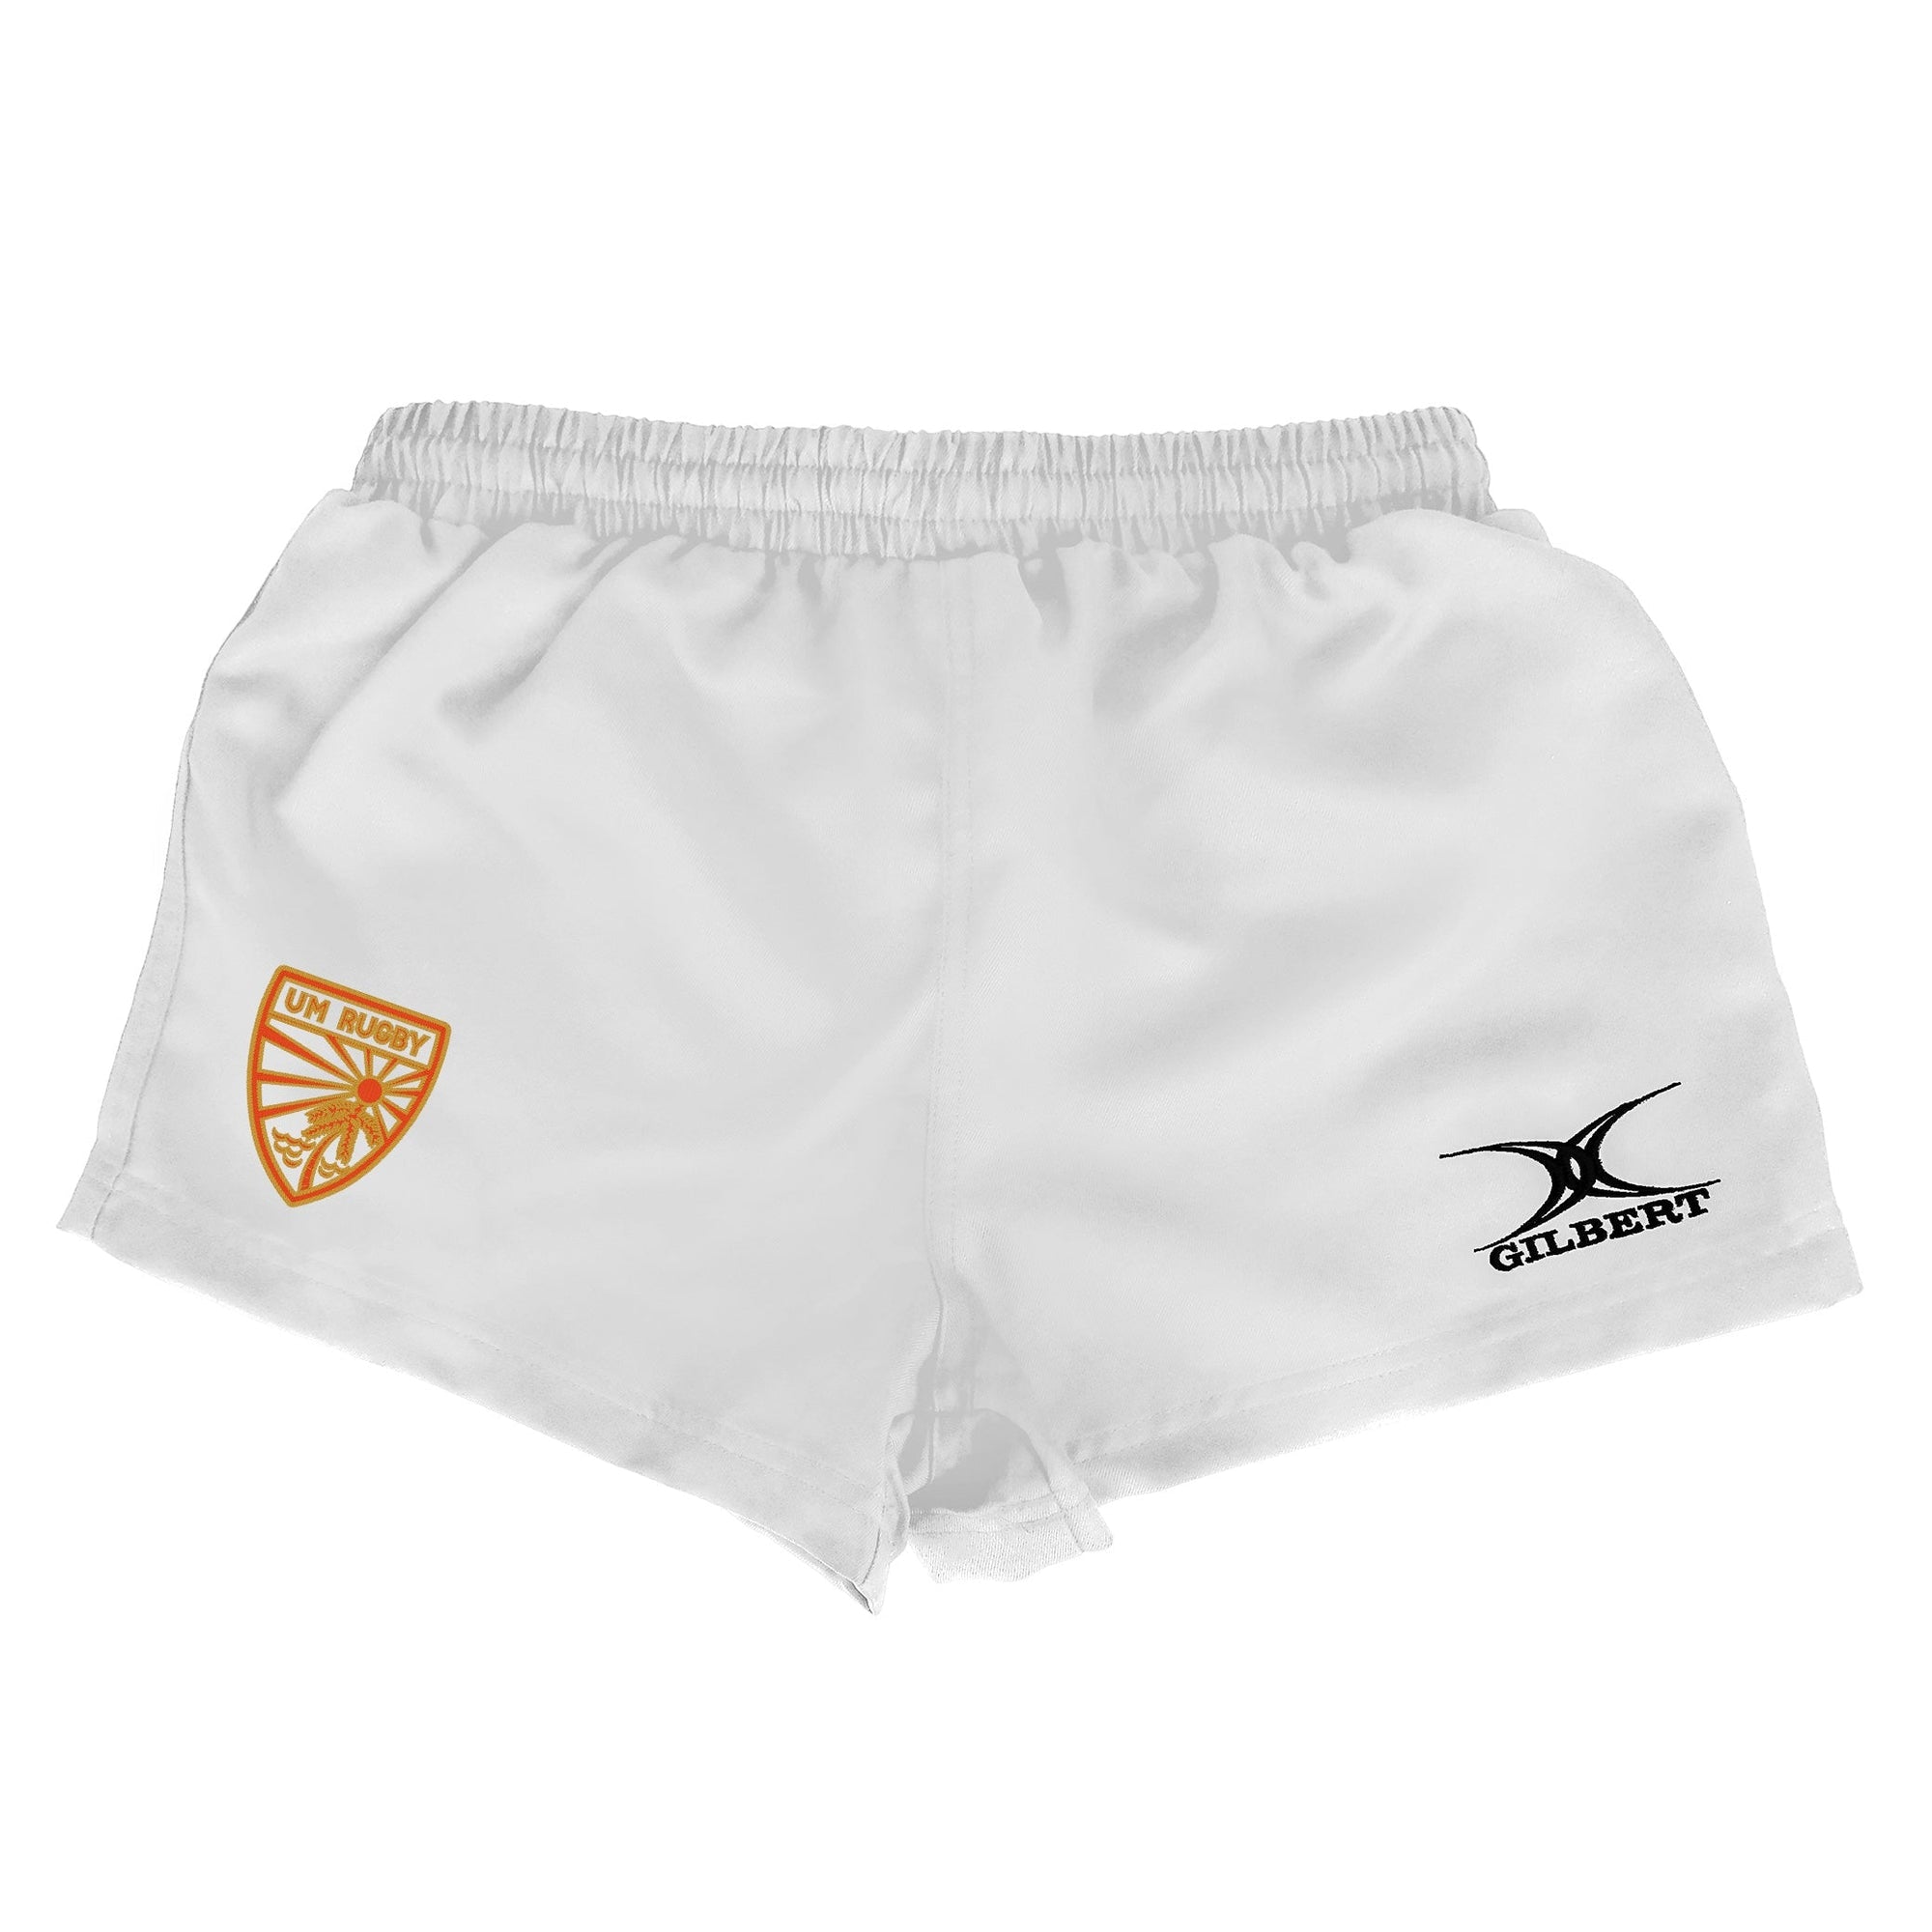 Rugby Imports UMiami Rugby Gilbert Saracen Shorts